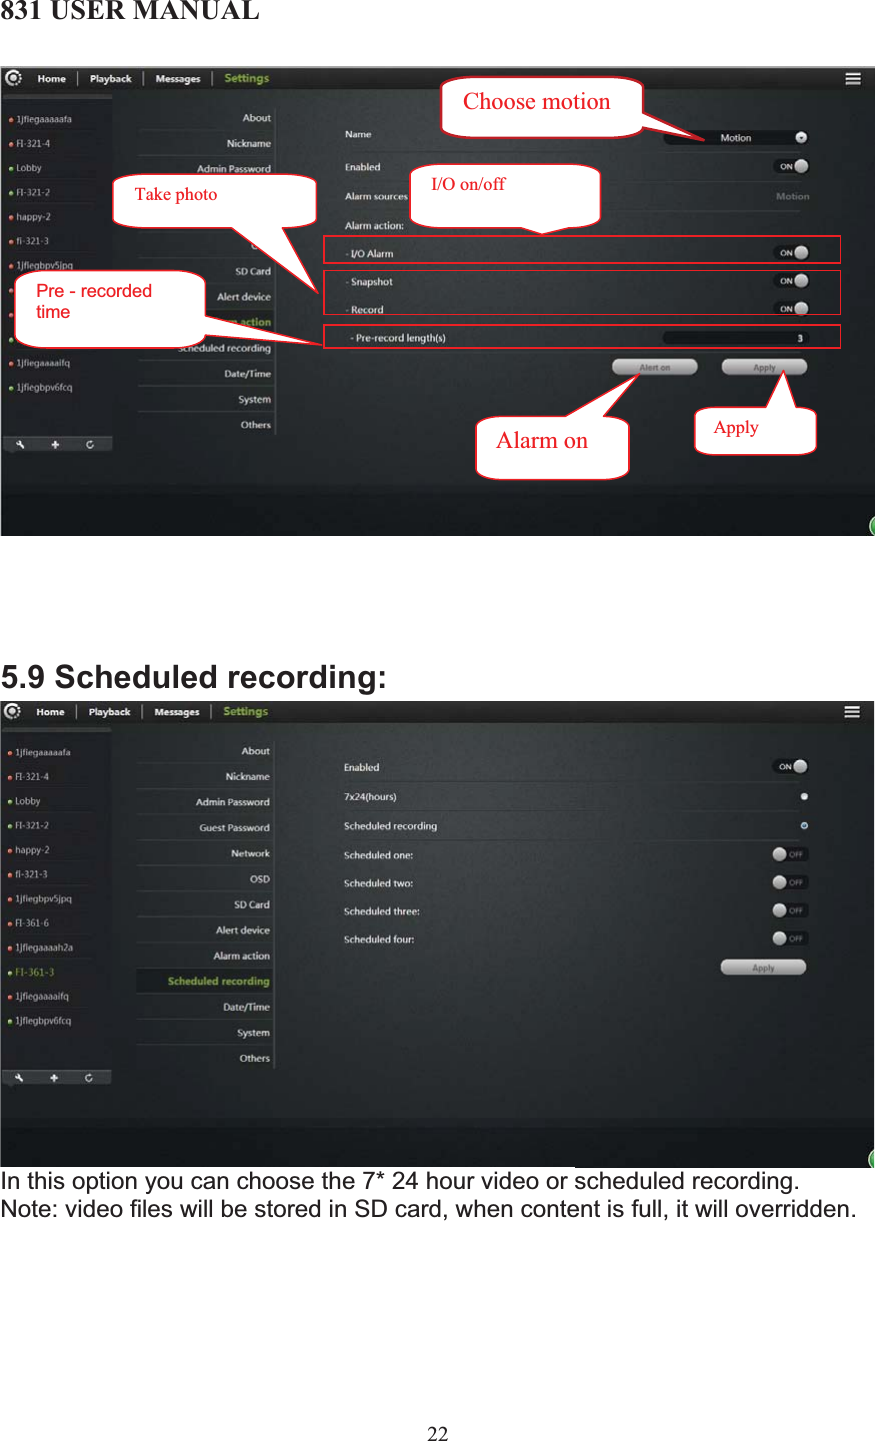 831 USER MANUAL 22 5.9 Scheduled recording: In this option you can choose the 7* 24 hour video or scheduled recording. Note: video files will be stored in SD card, when content is full, it will overridden. I/O on/offTake photo Pre - recorded timeAlarm on  Apply Choose motion 